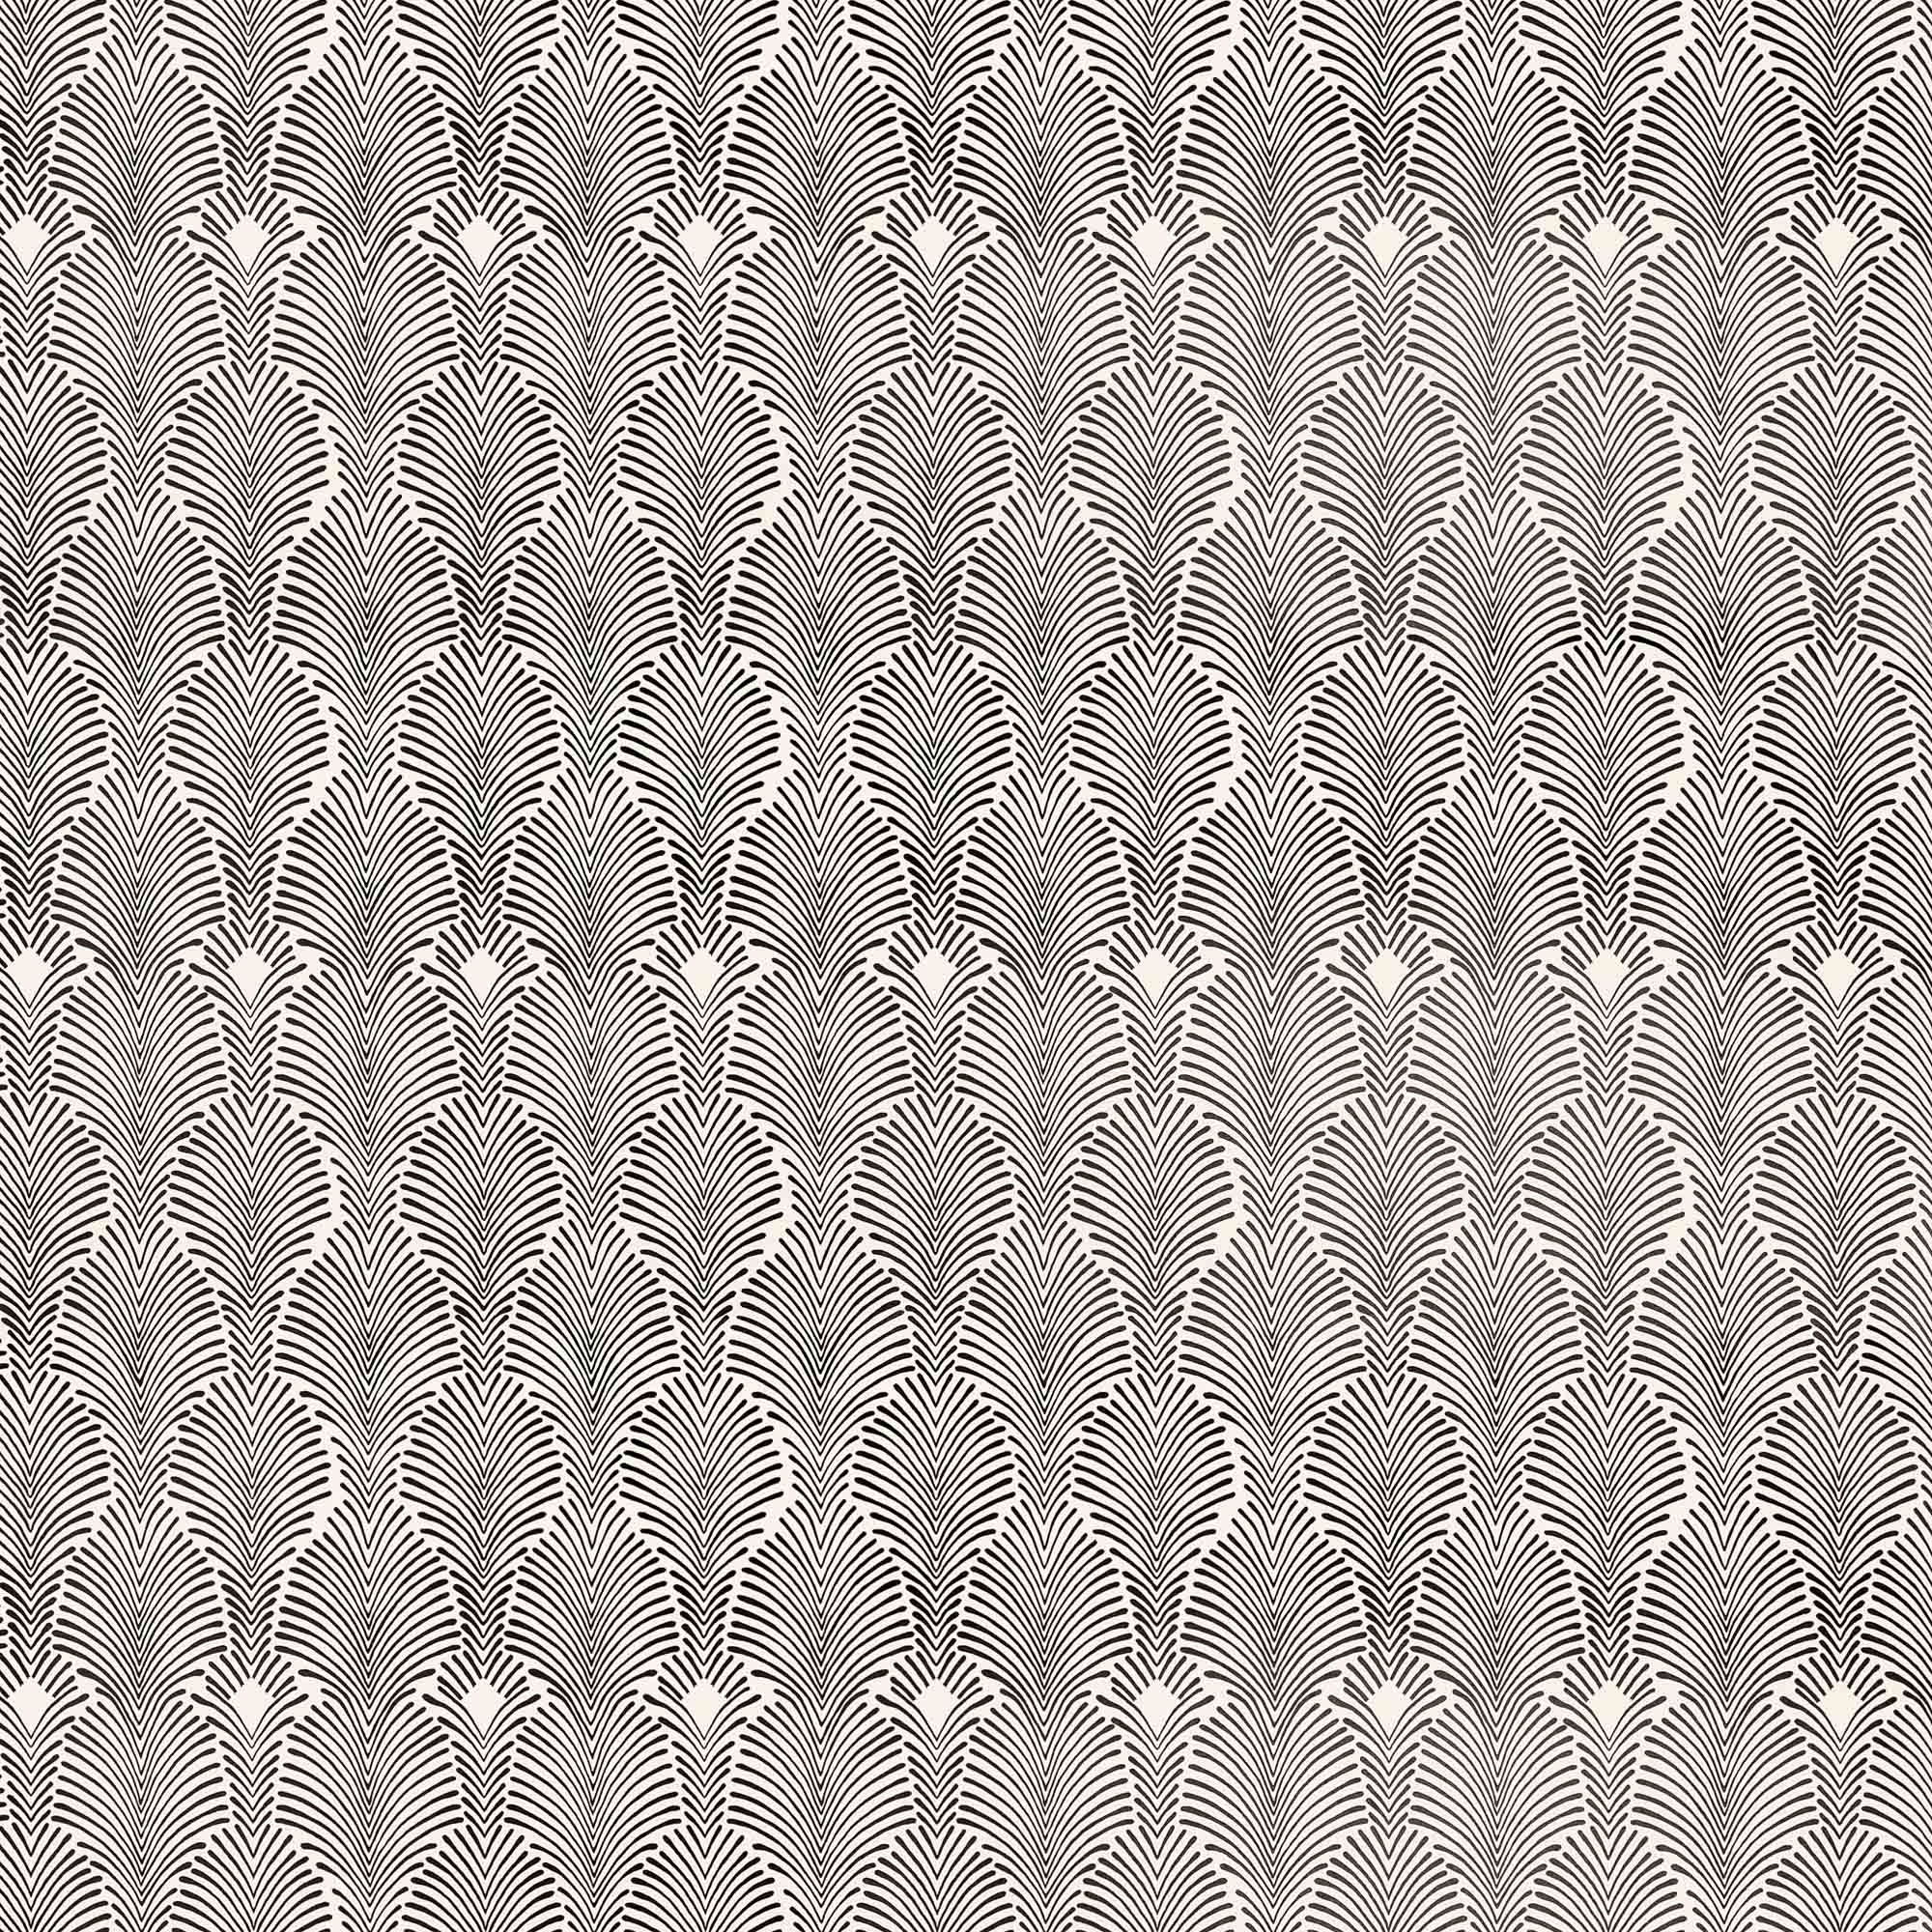 Detail of wallpaper in an art deco damask print in black on a white field.